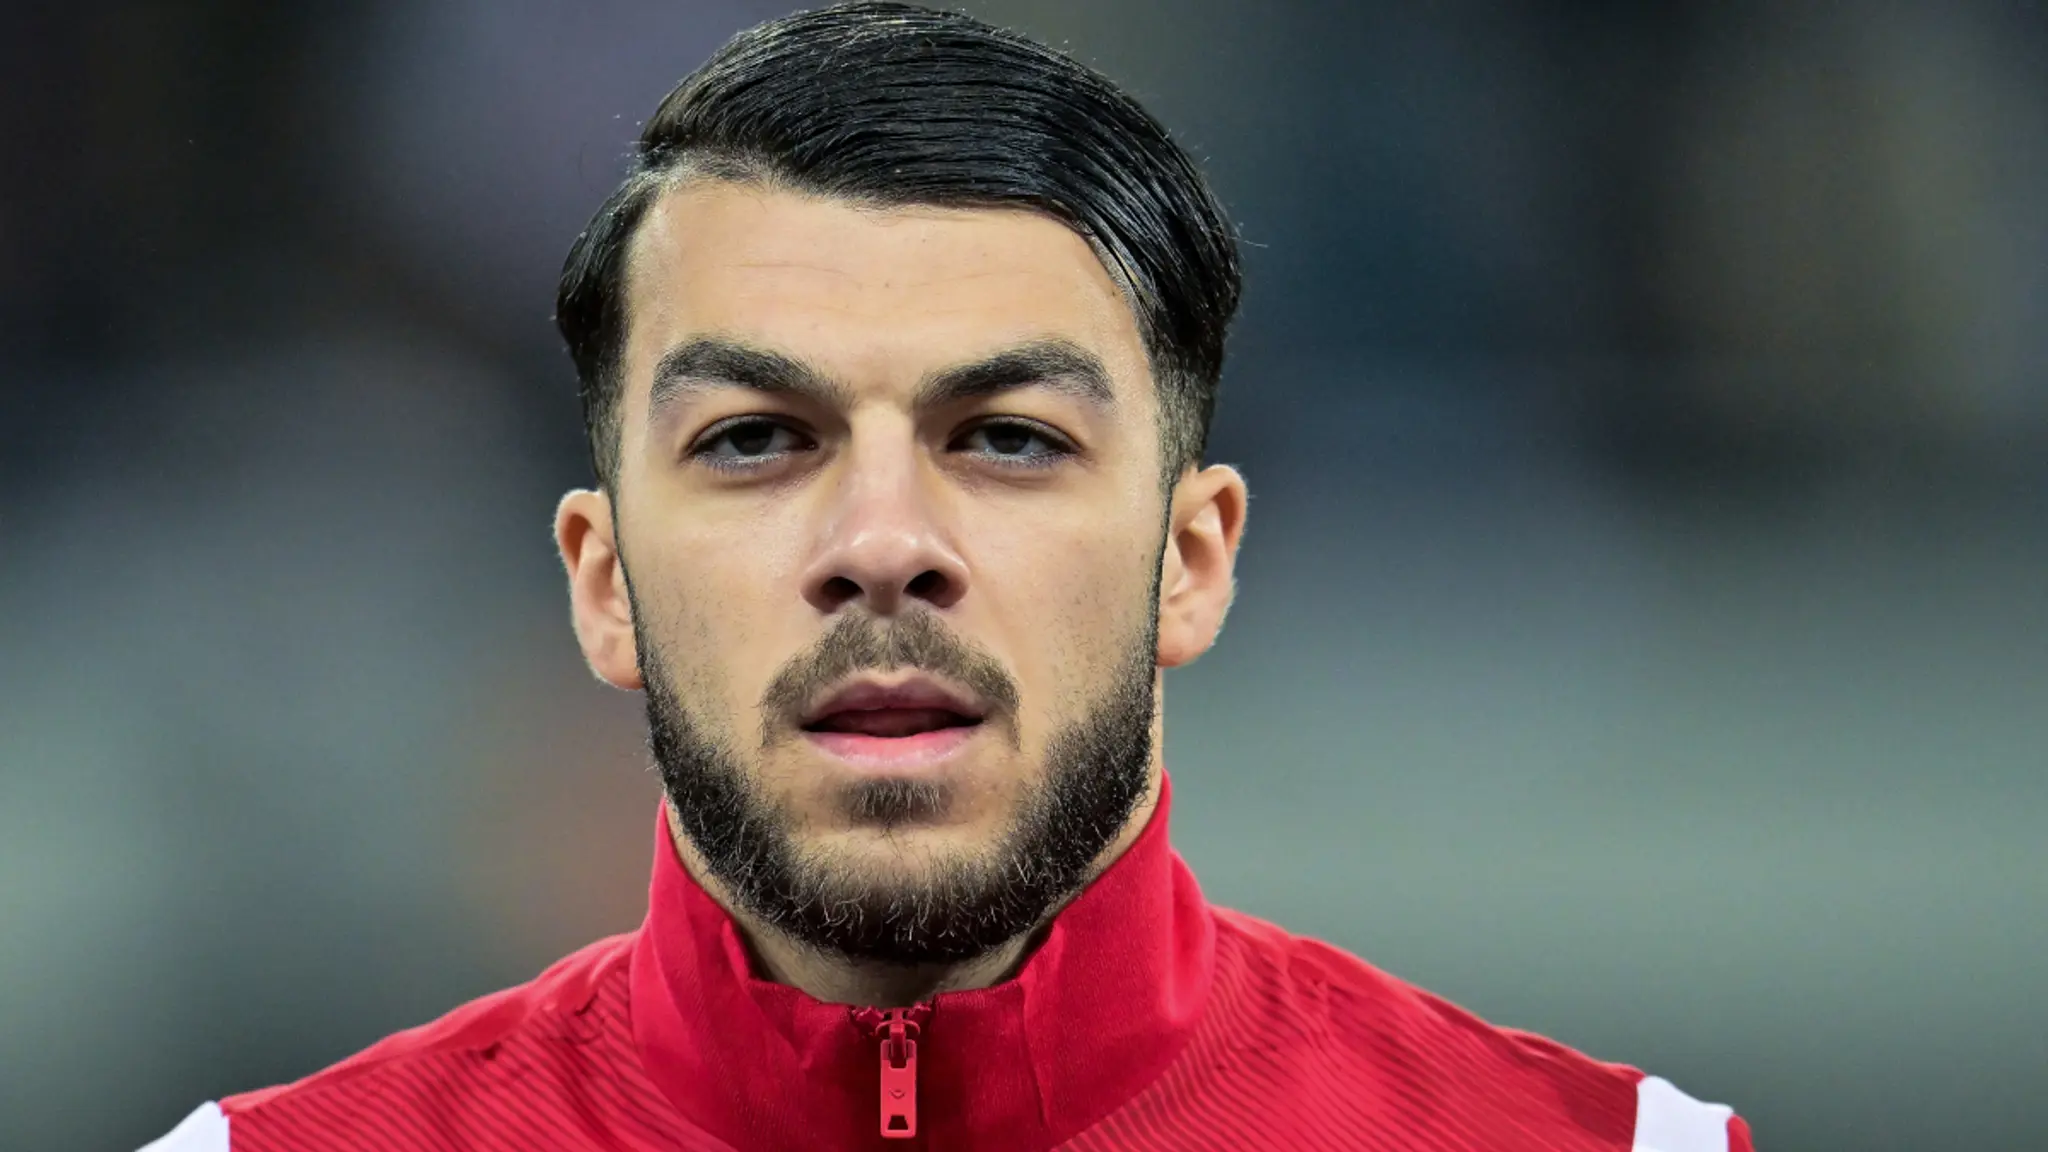 Napoli have reaped major benefits from signing Khvicha Kvaratskhelia for cheap and aim to replicate such a deal by targeting more Georgian players.